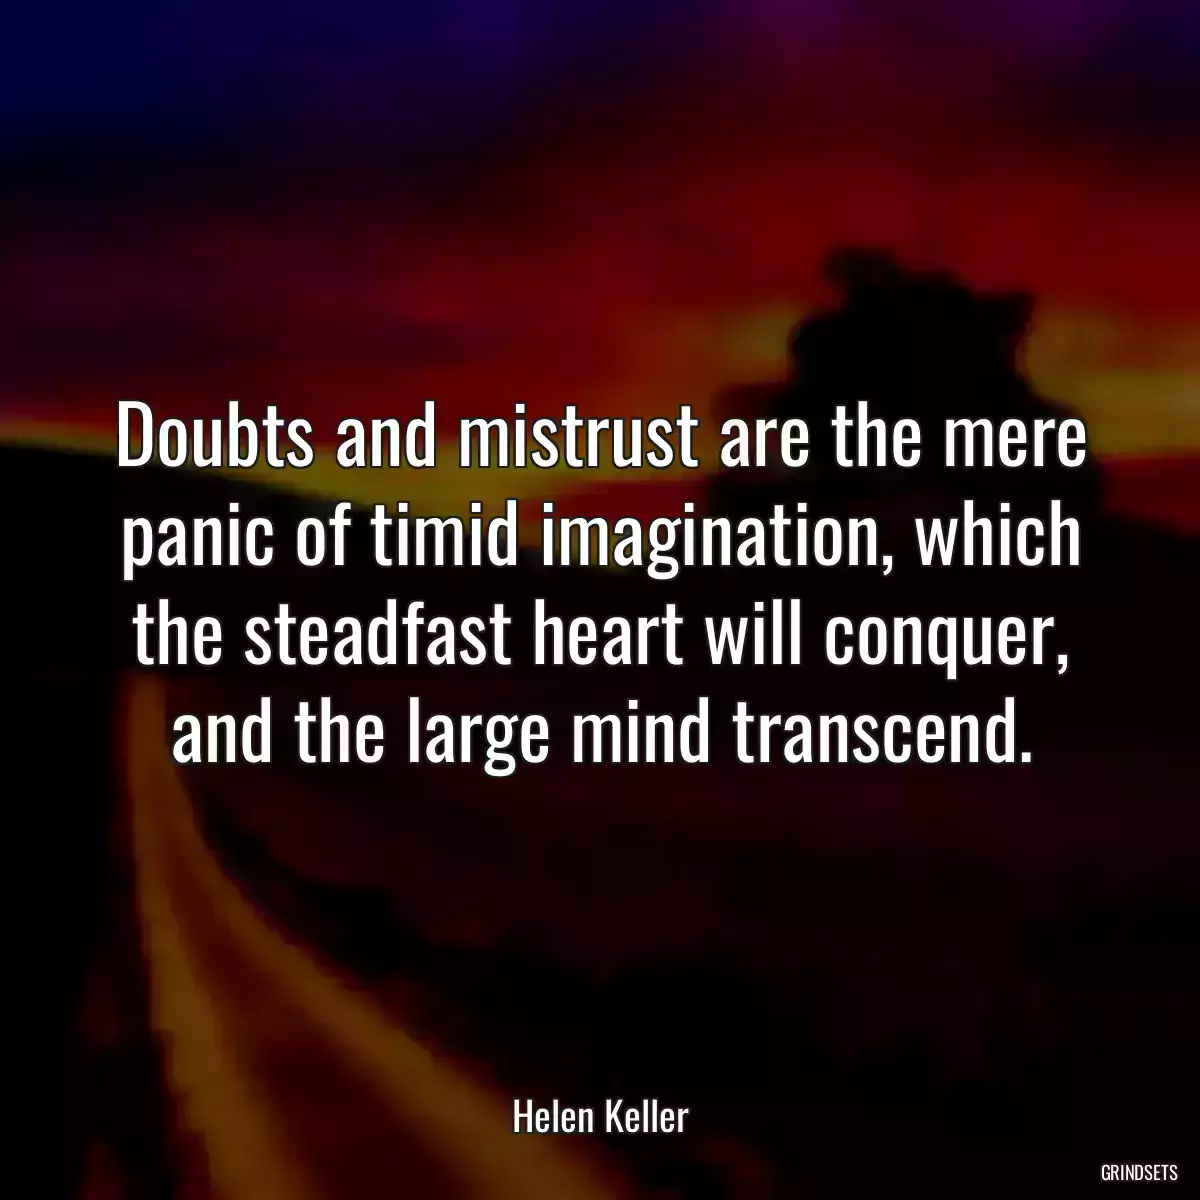 Doubts and mistrust are the mere panic of timid imagination, which the steadfast heart will conquer, and the large mind transcend.